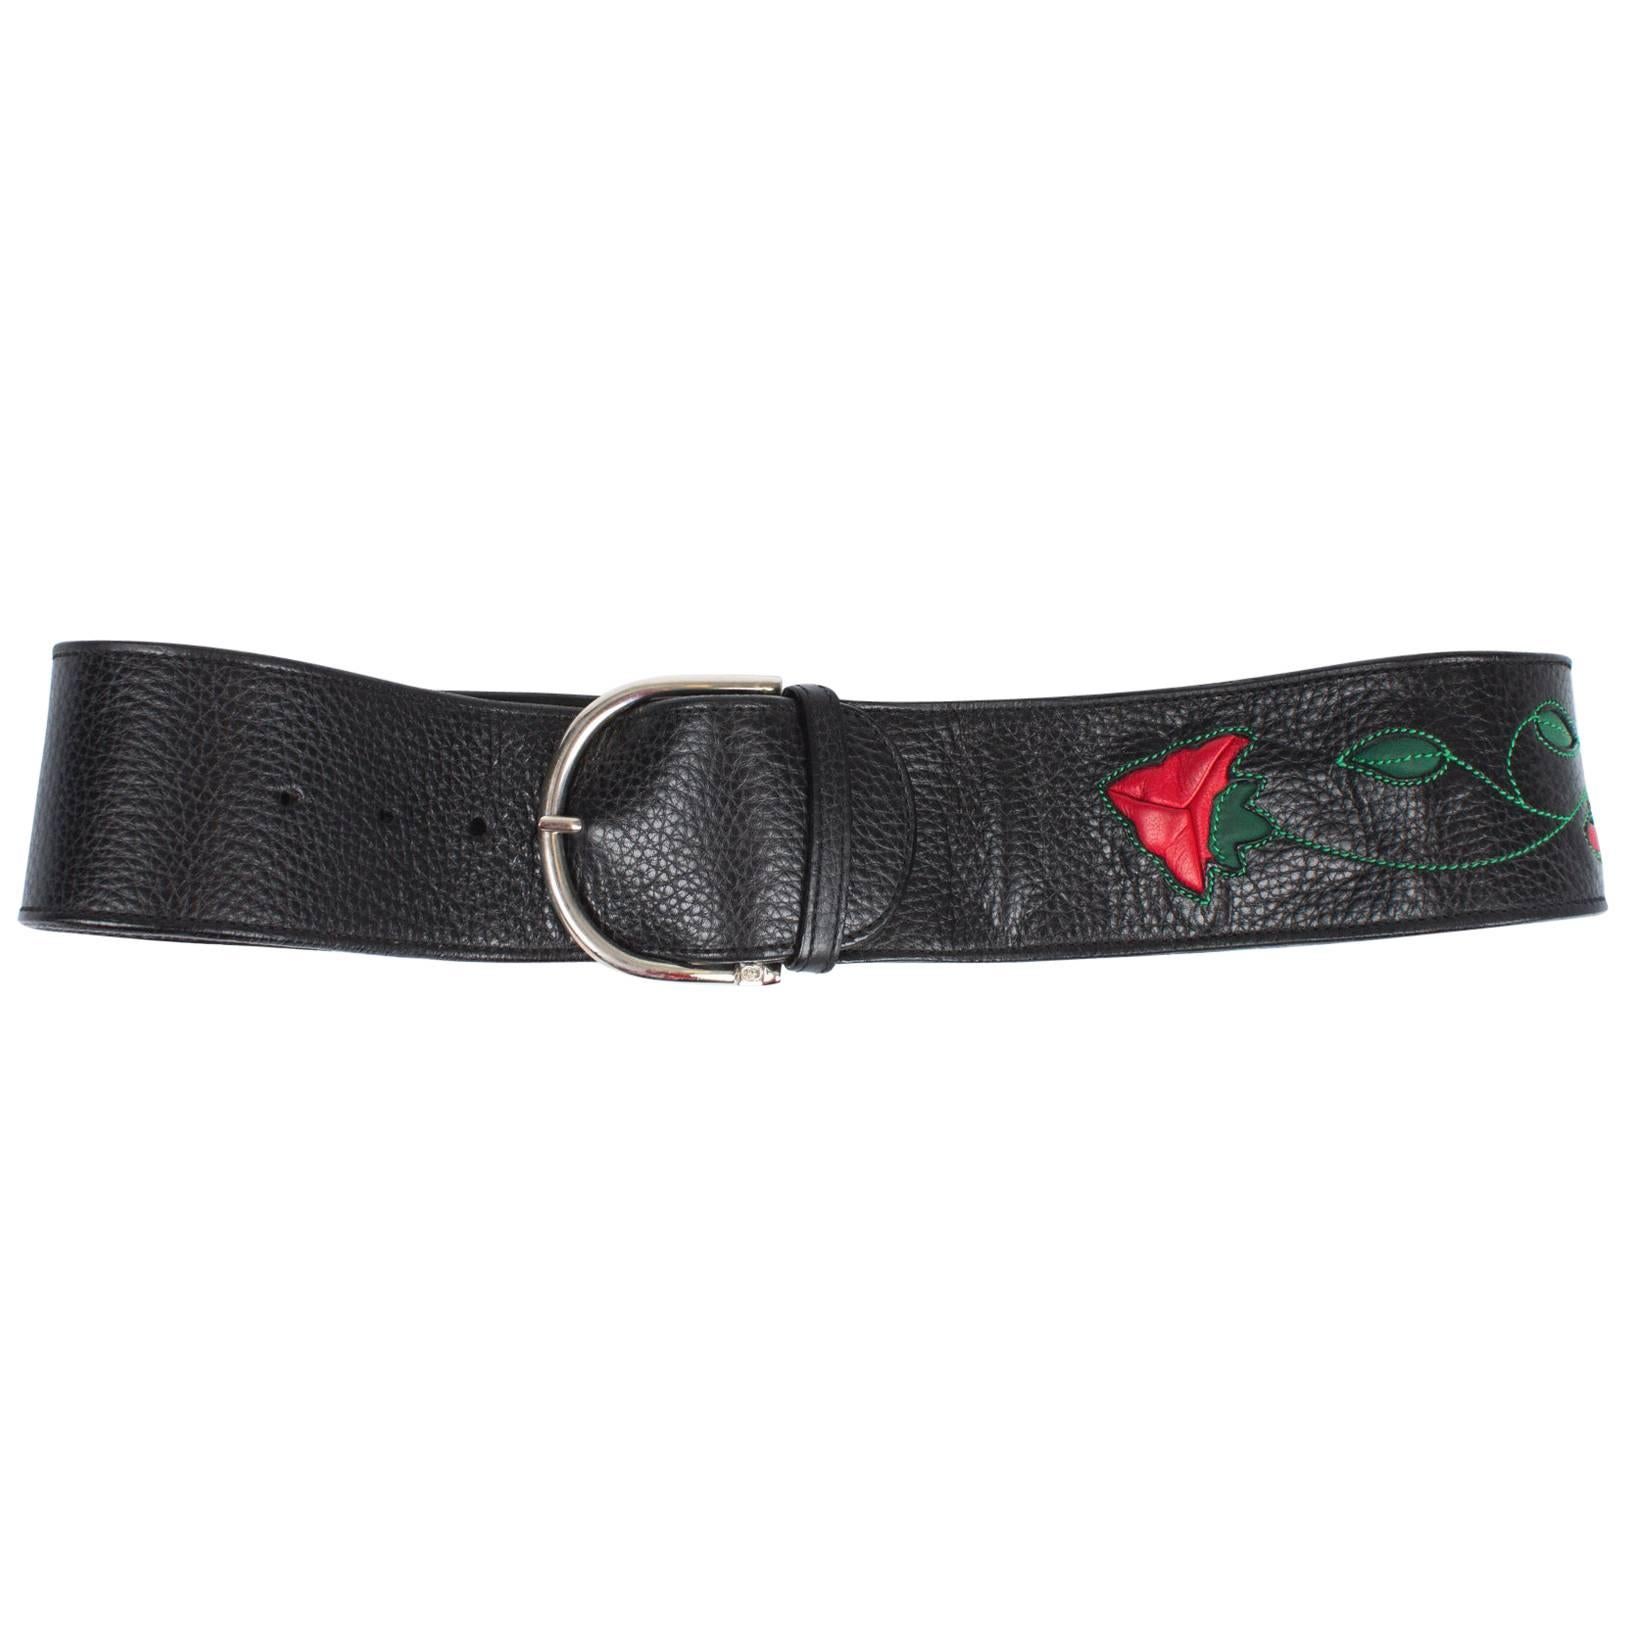 Gucci Belt Leather - black/red/green For Sale